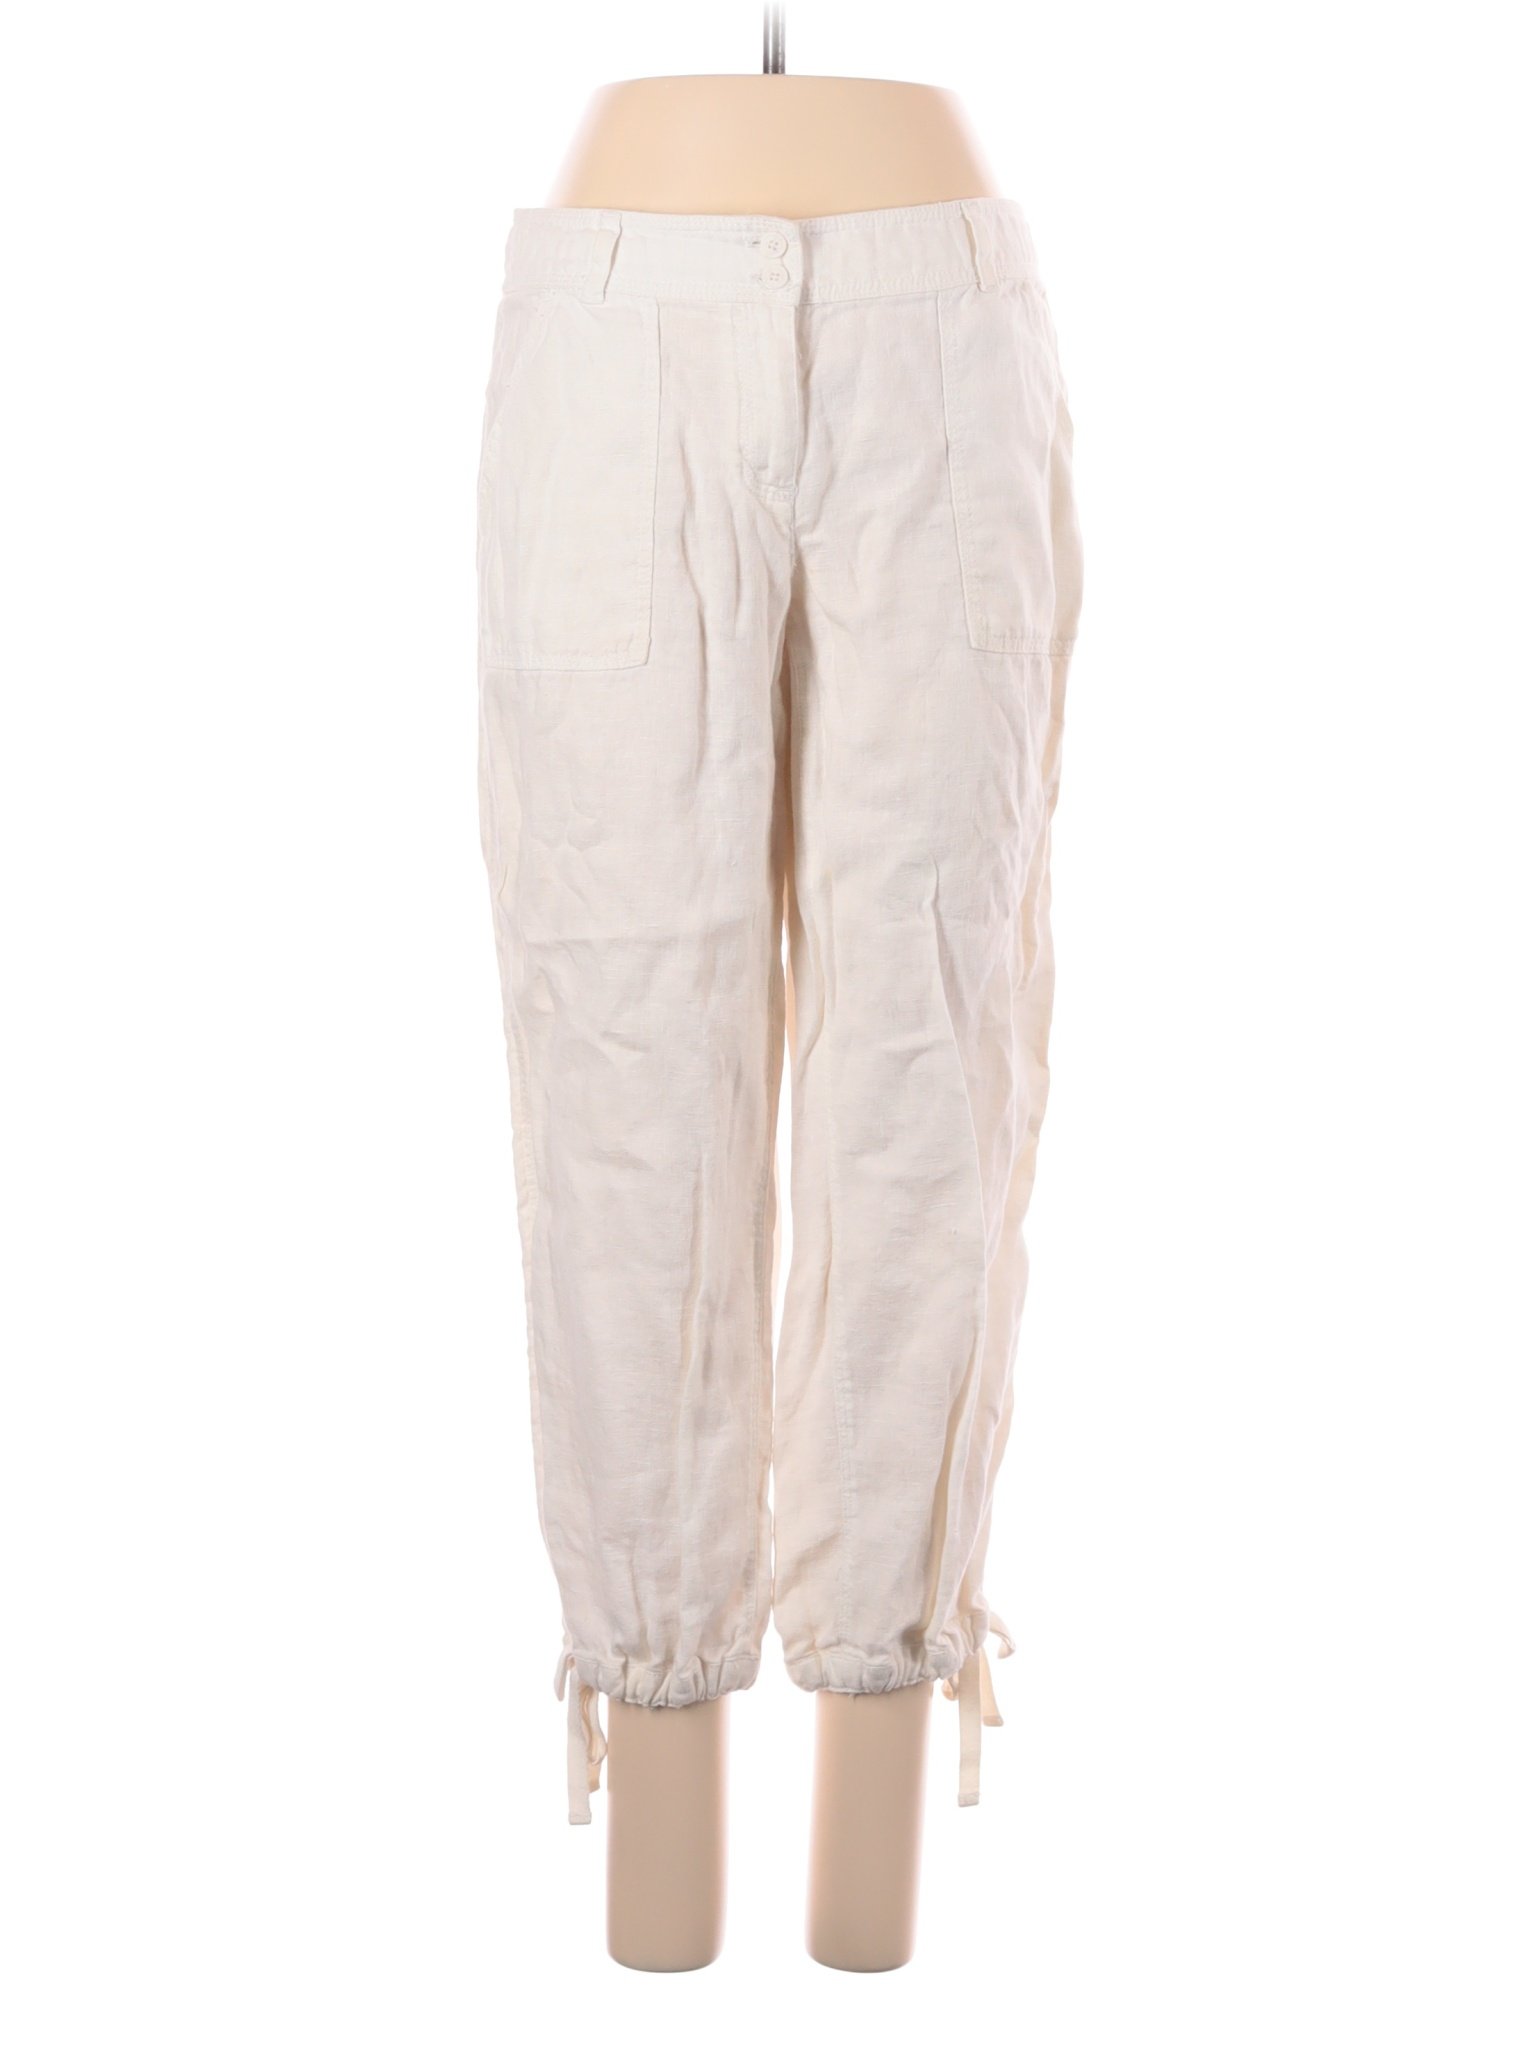 Tommy Bahama 100% Linen Solid Ivory Linen Pants Size 4 - 69% off | thredUP